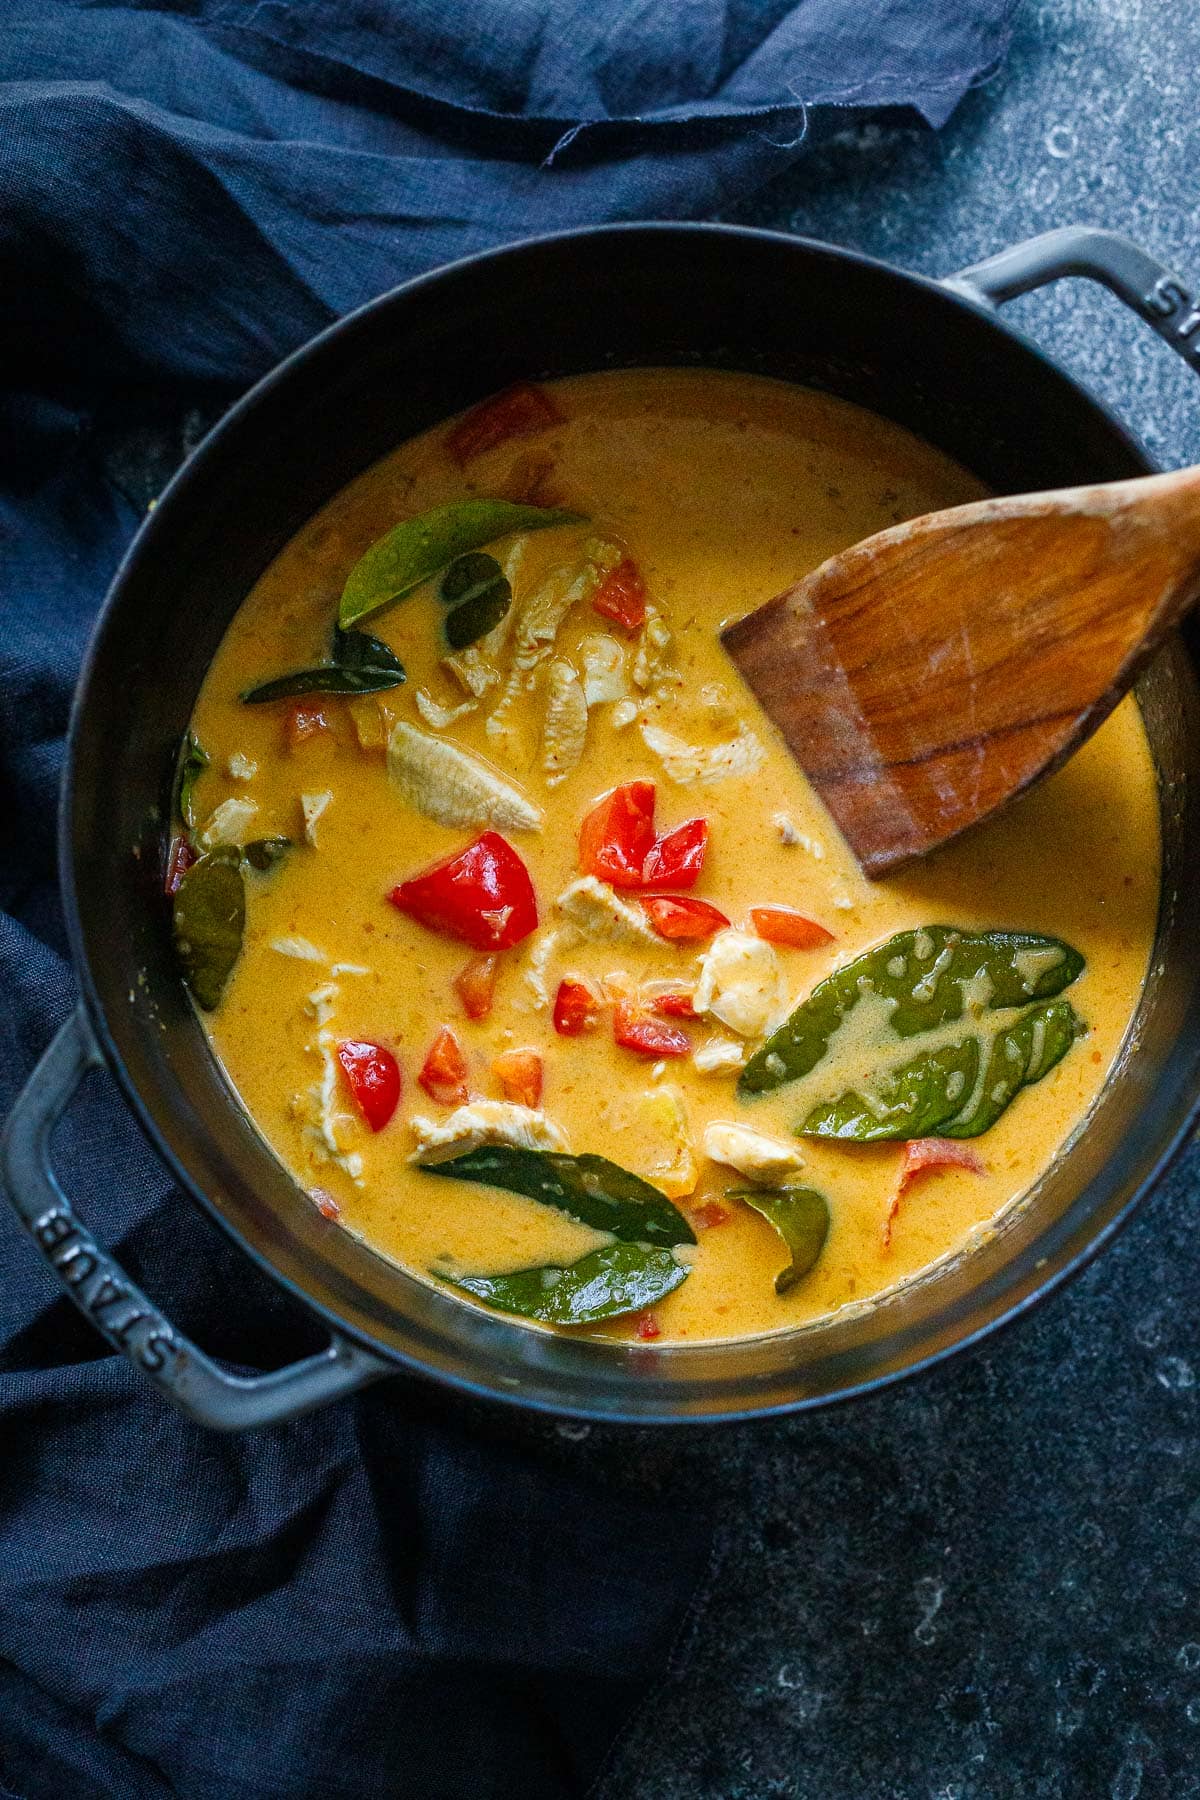 This Thai Red Curry recipe is bursting with authentic Thai flavor and can be made in 30 minutes on the stove or in your Instant Pot!  A quick and easy dinner recipe the whole family will love. Serve it with jasmine rice and save the amazing leftovers for lunch! Vegetarian-adaptable. 